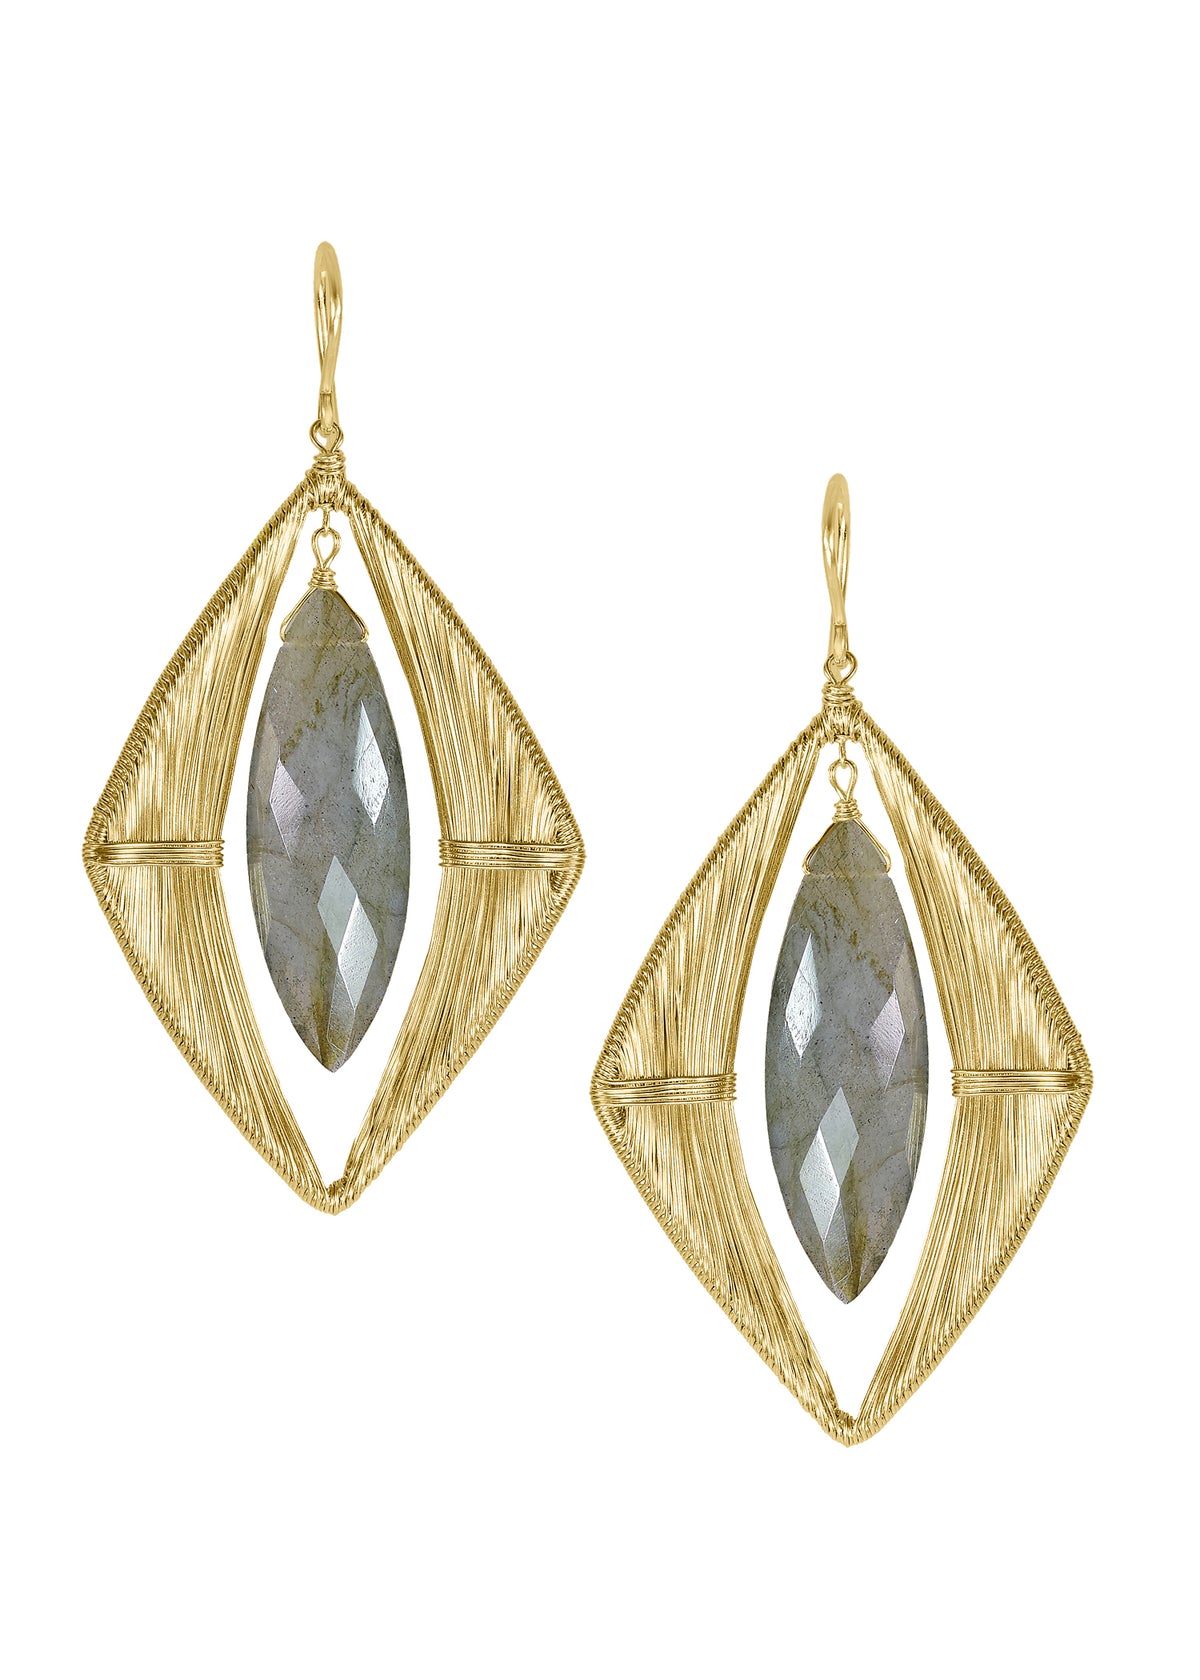 Labradorite 14k gold fill Earrings measure 2-1/4&quot; in length (including the ear wires) and 1-1/4&quot; in width at the widest point Handmade in our Los Angeles studio